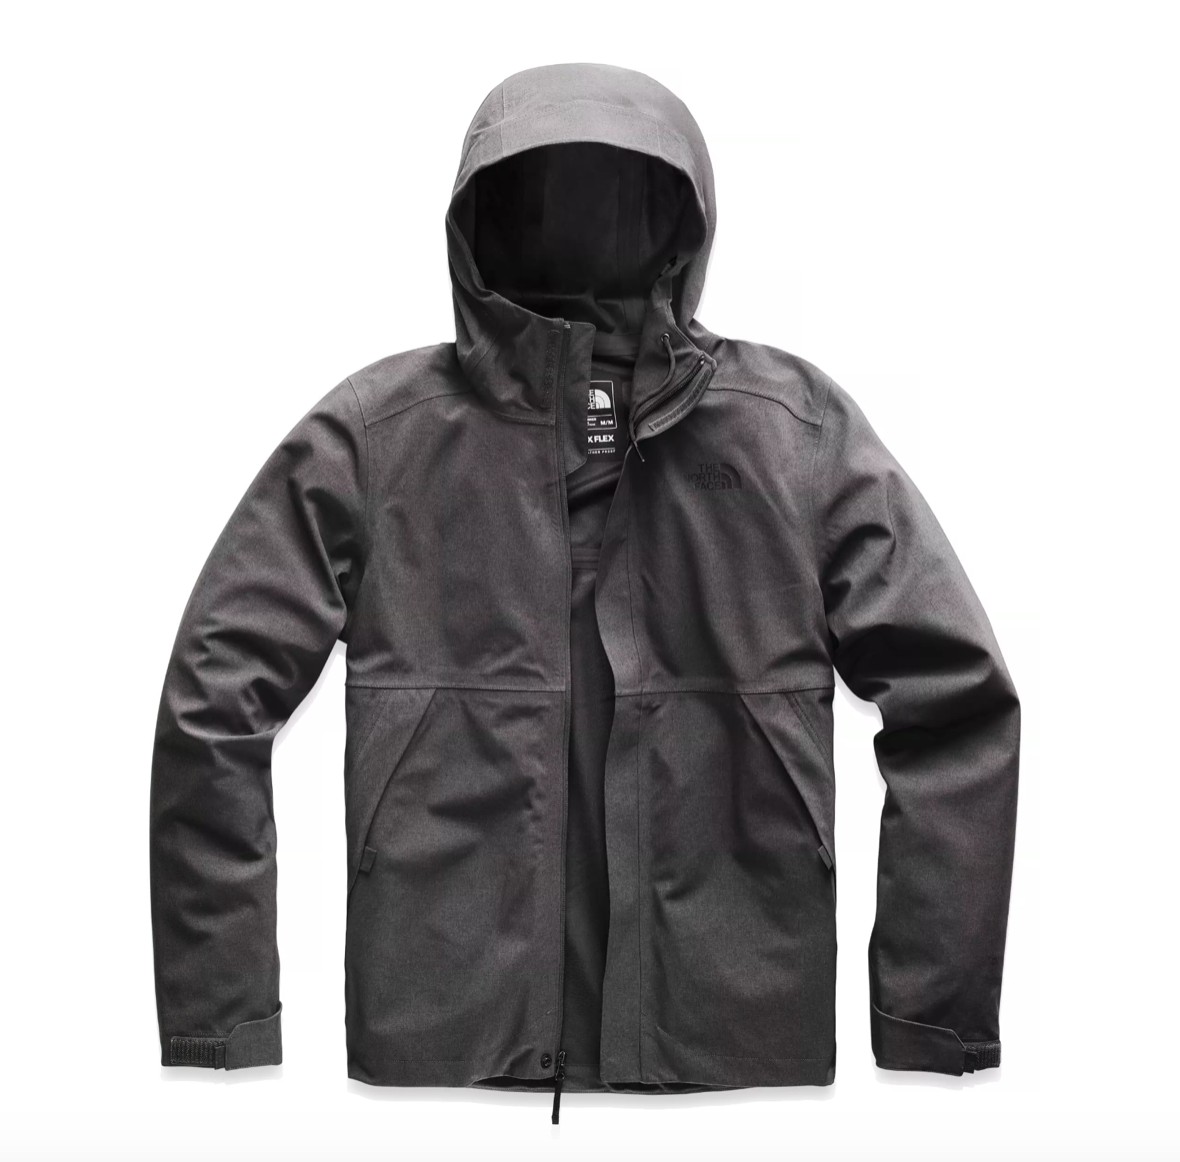 The North Face DryVent Rain Jacket